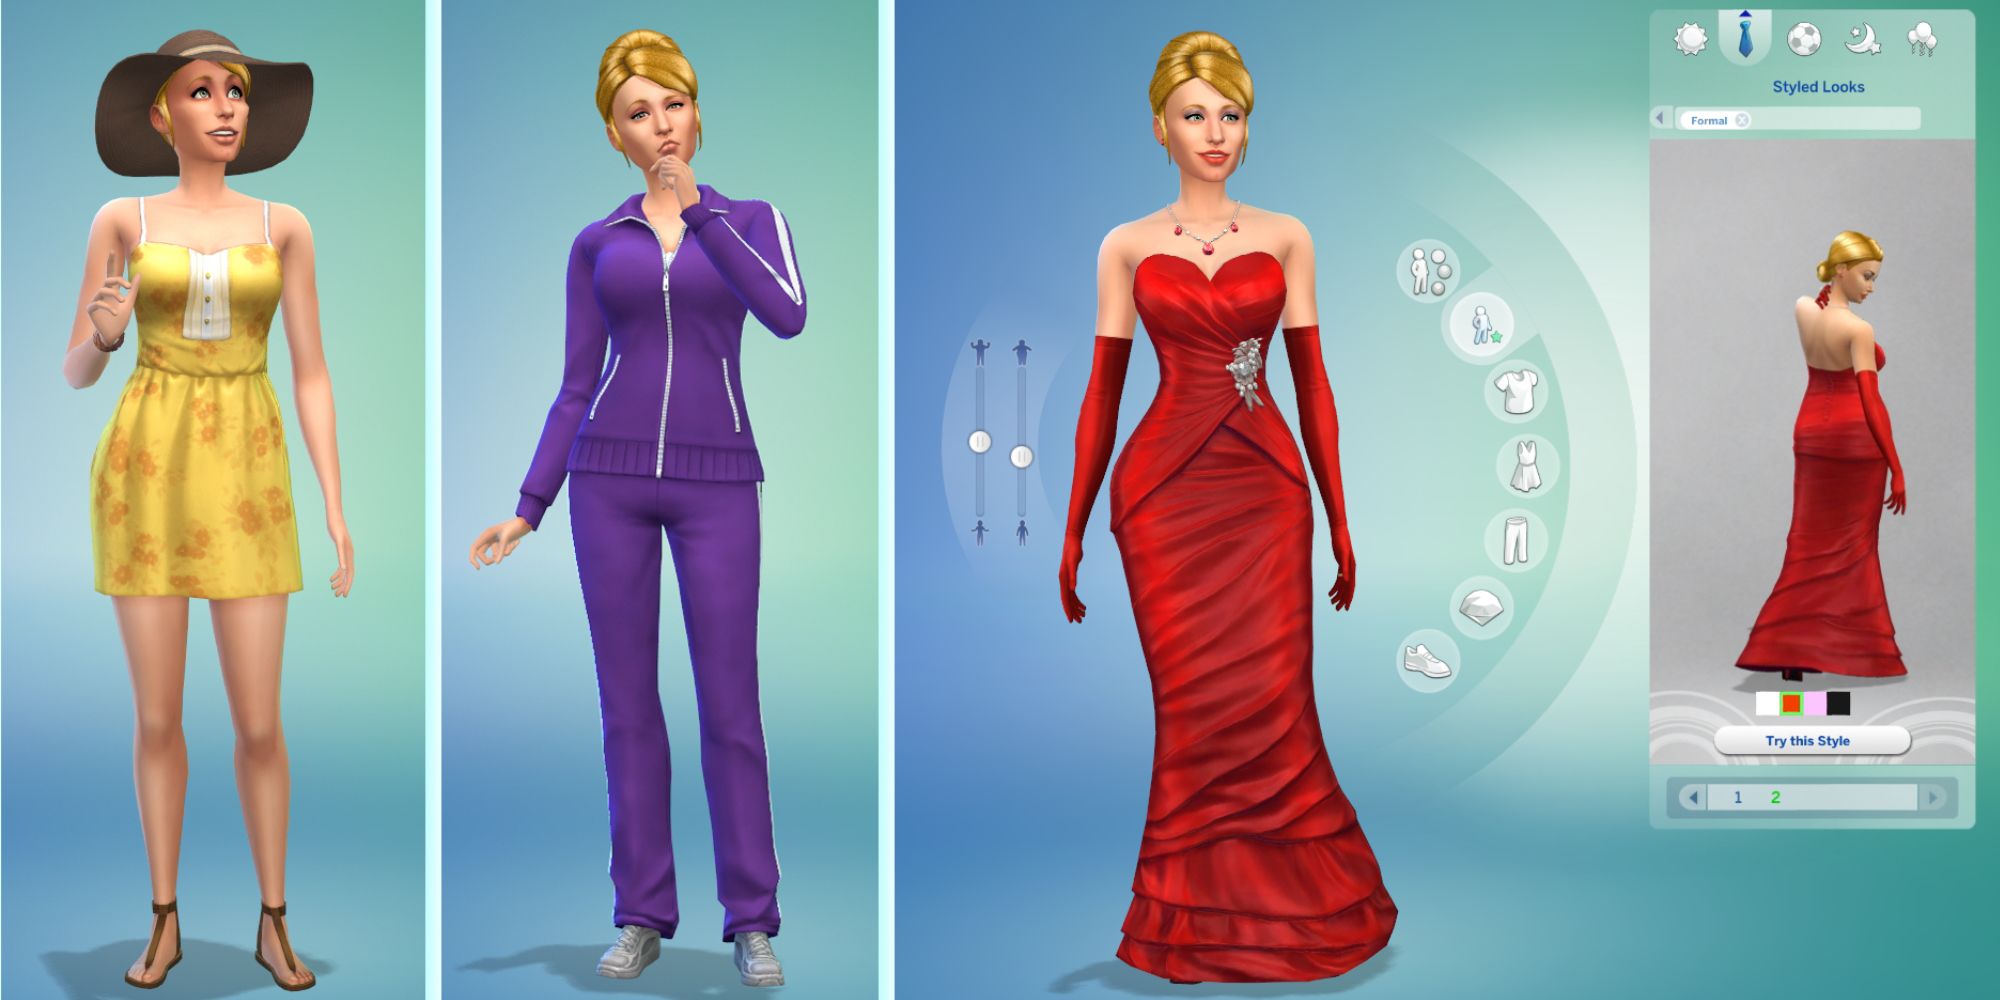 Sims 4 base game different styles shown in cas